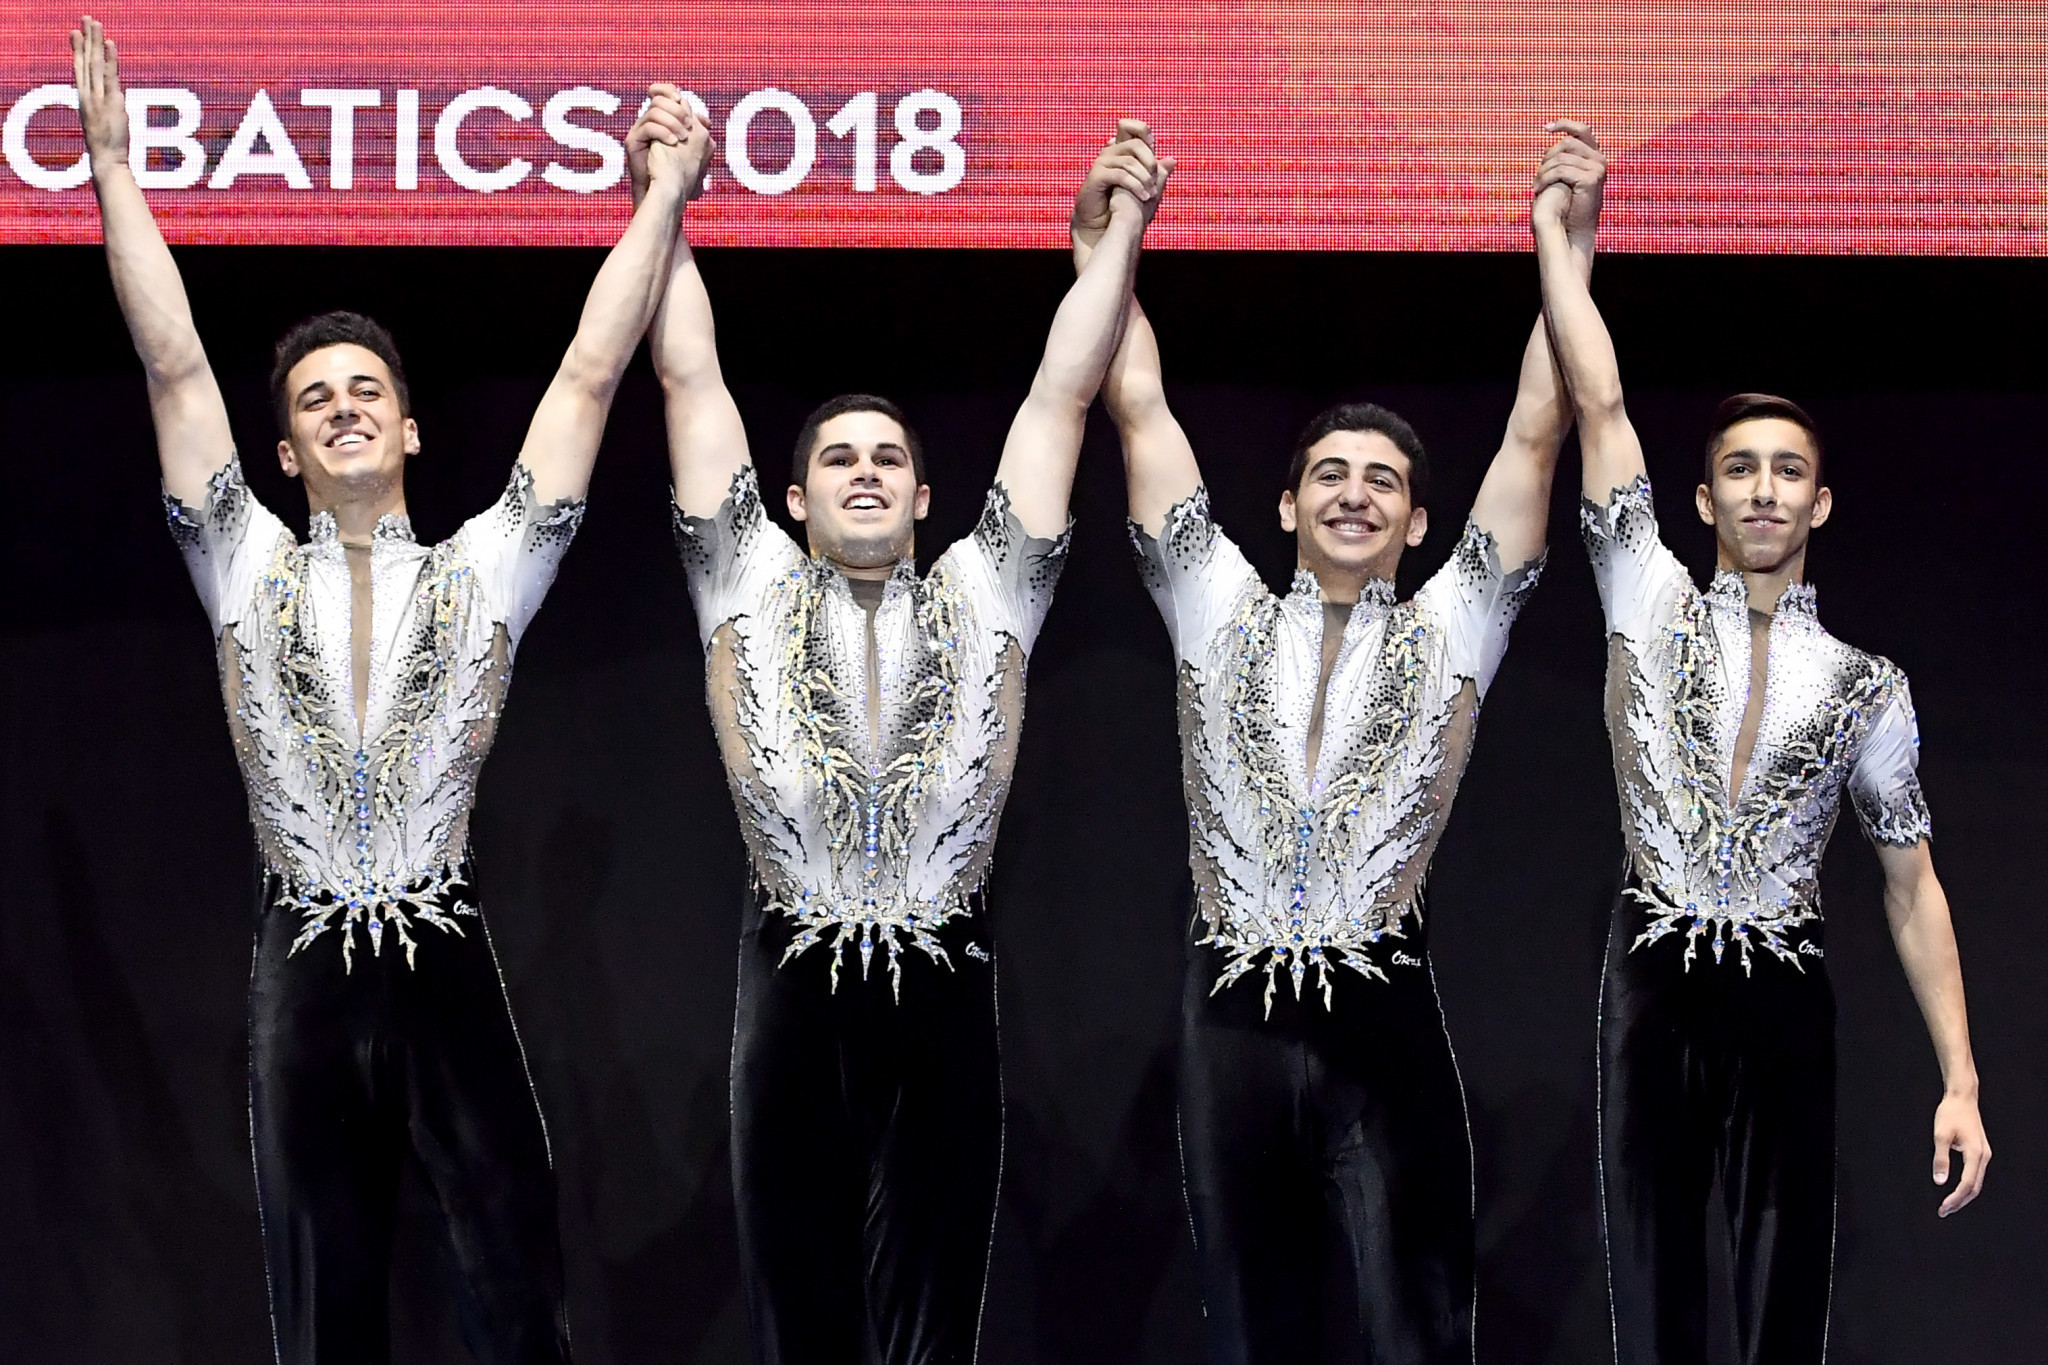 Israel's men won a group gold medal at the 2018 Acrobatic Gymnastics World Championships ©Getty Images